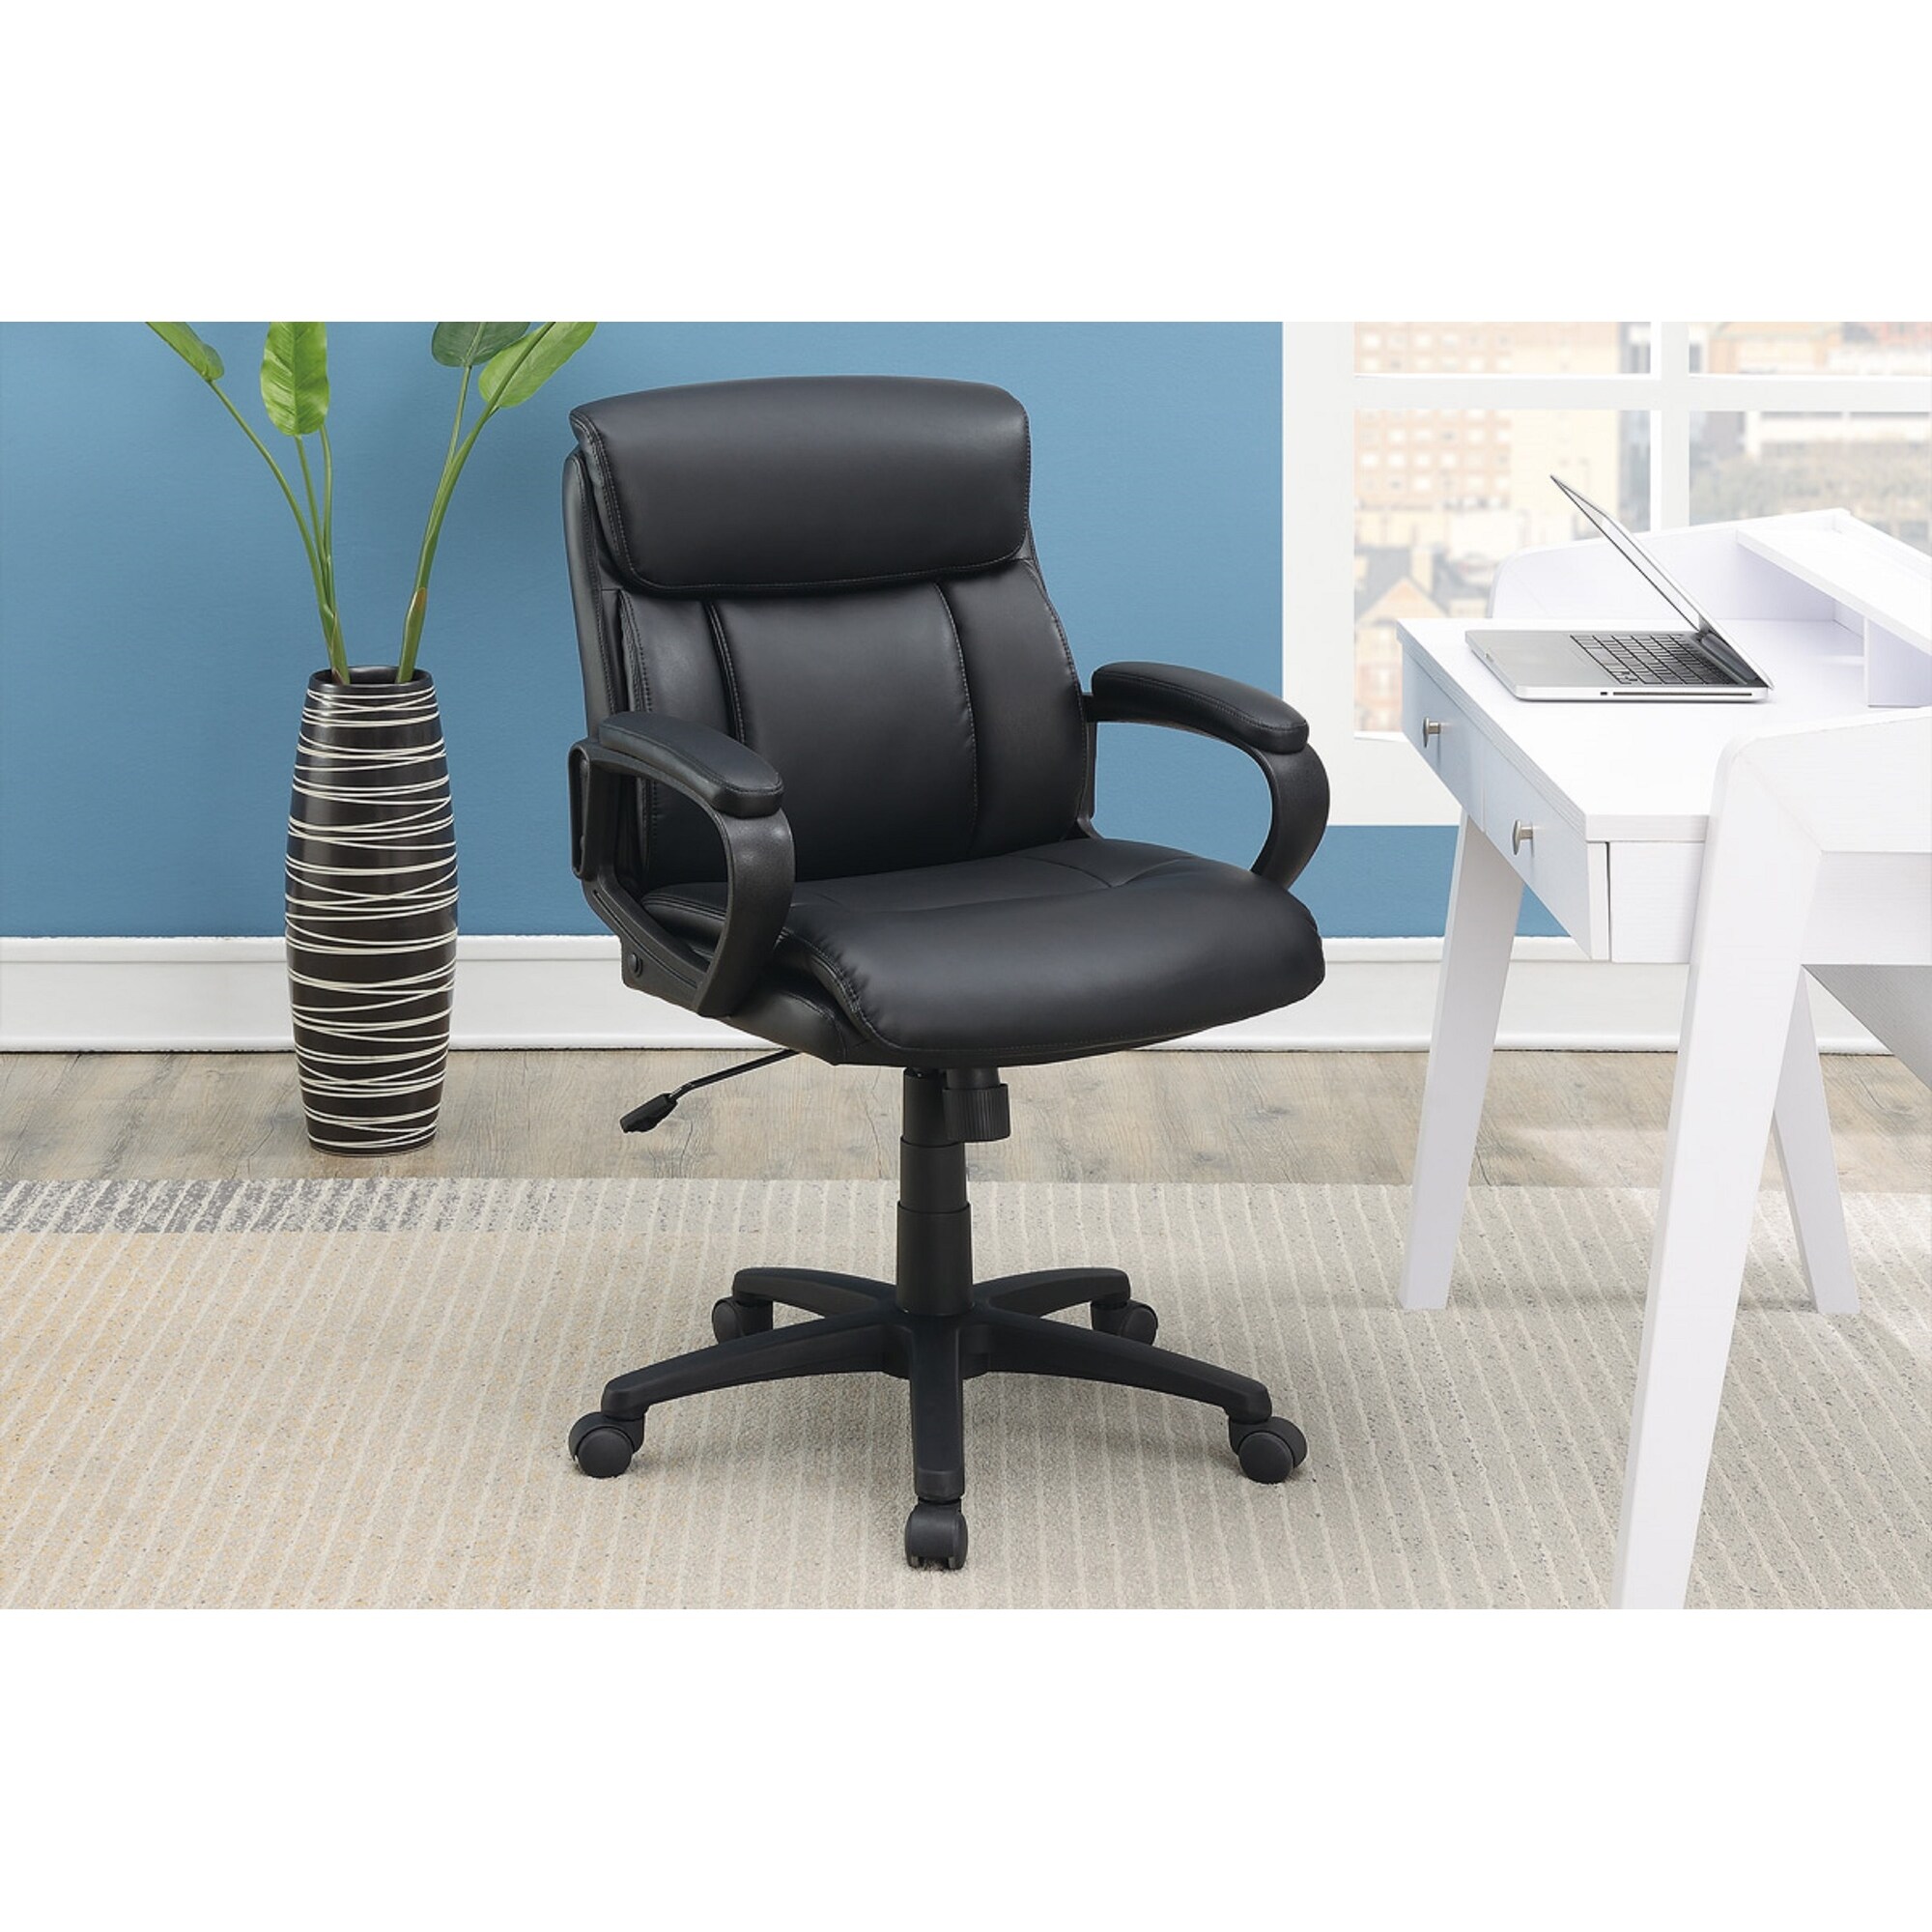 https://ak1.ostkcdn.com/images/products/is/images/direct/4ae38fa5a456b0a8988334f5f3e194852b94daf0/Mid-Back-Executive-Office-Chair%2C-Ergonomic-Adjustable-Computer-Task-Armrests-Chair%2C-Padded-Desk-Chair-with-Lumbar-Support%2C-Black.jpg